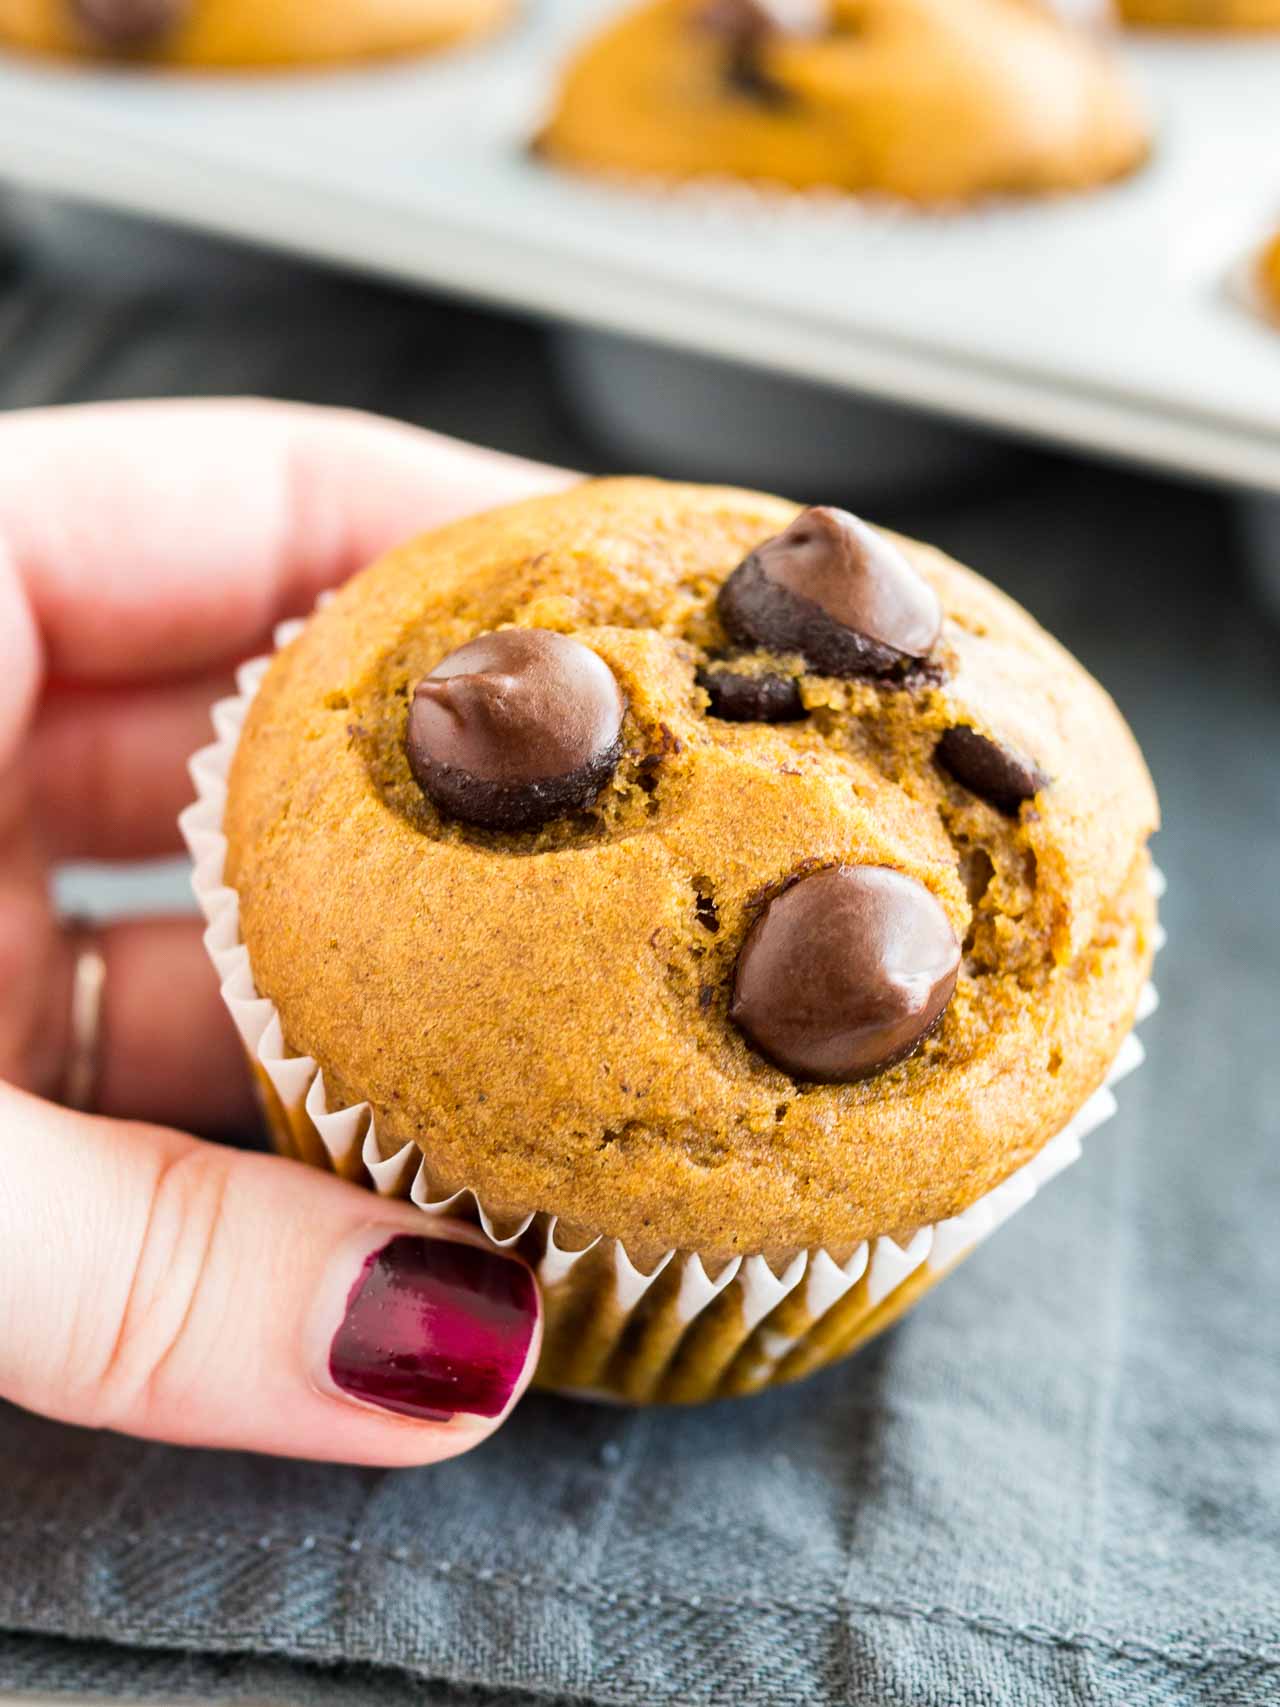 A hand with red nail polish holding up a pumpkin chocolate chip muffin over a grey dishtowel and a grey muffin pan with muffins.